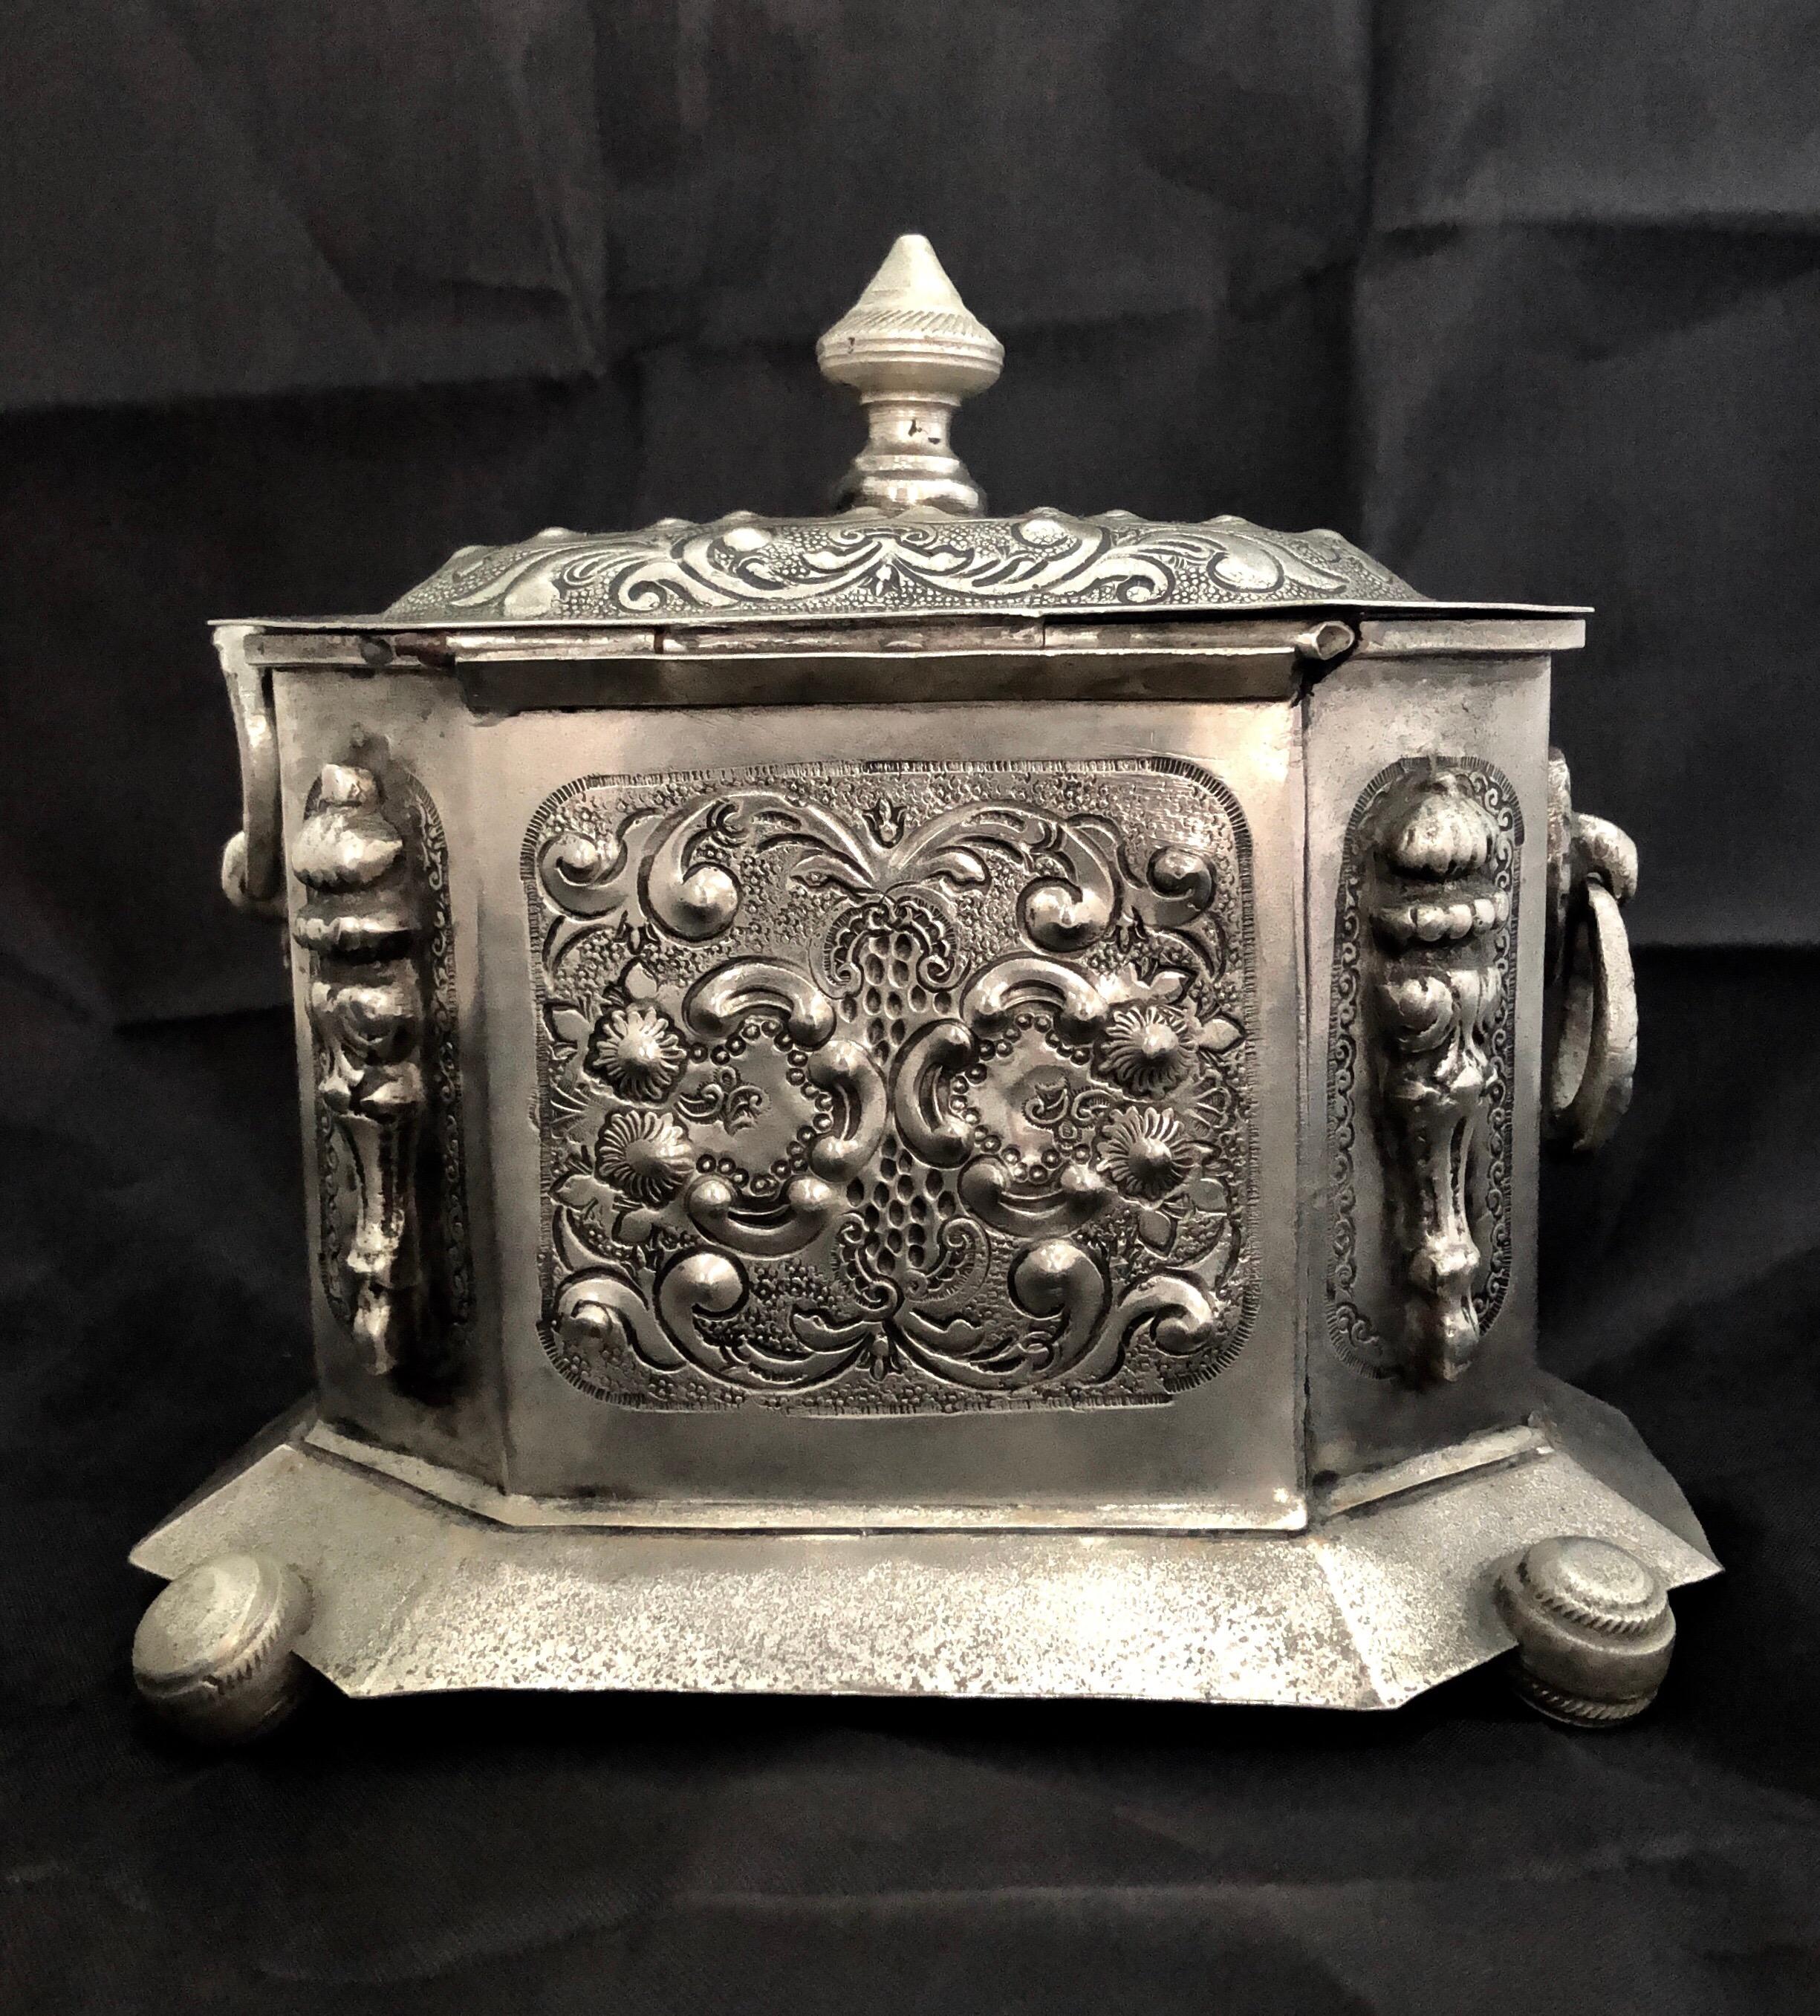 This lovely antique Moroccan silver tea box comes from the ancient city of Fes, Morocco. Used for many generations to store tea, this octagonal container is lusciously decorated in numerous different metalwork techniques. In addition to repoussée